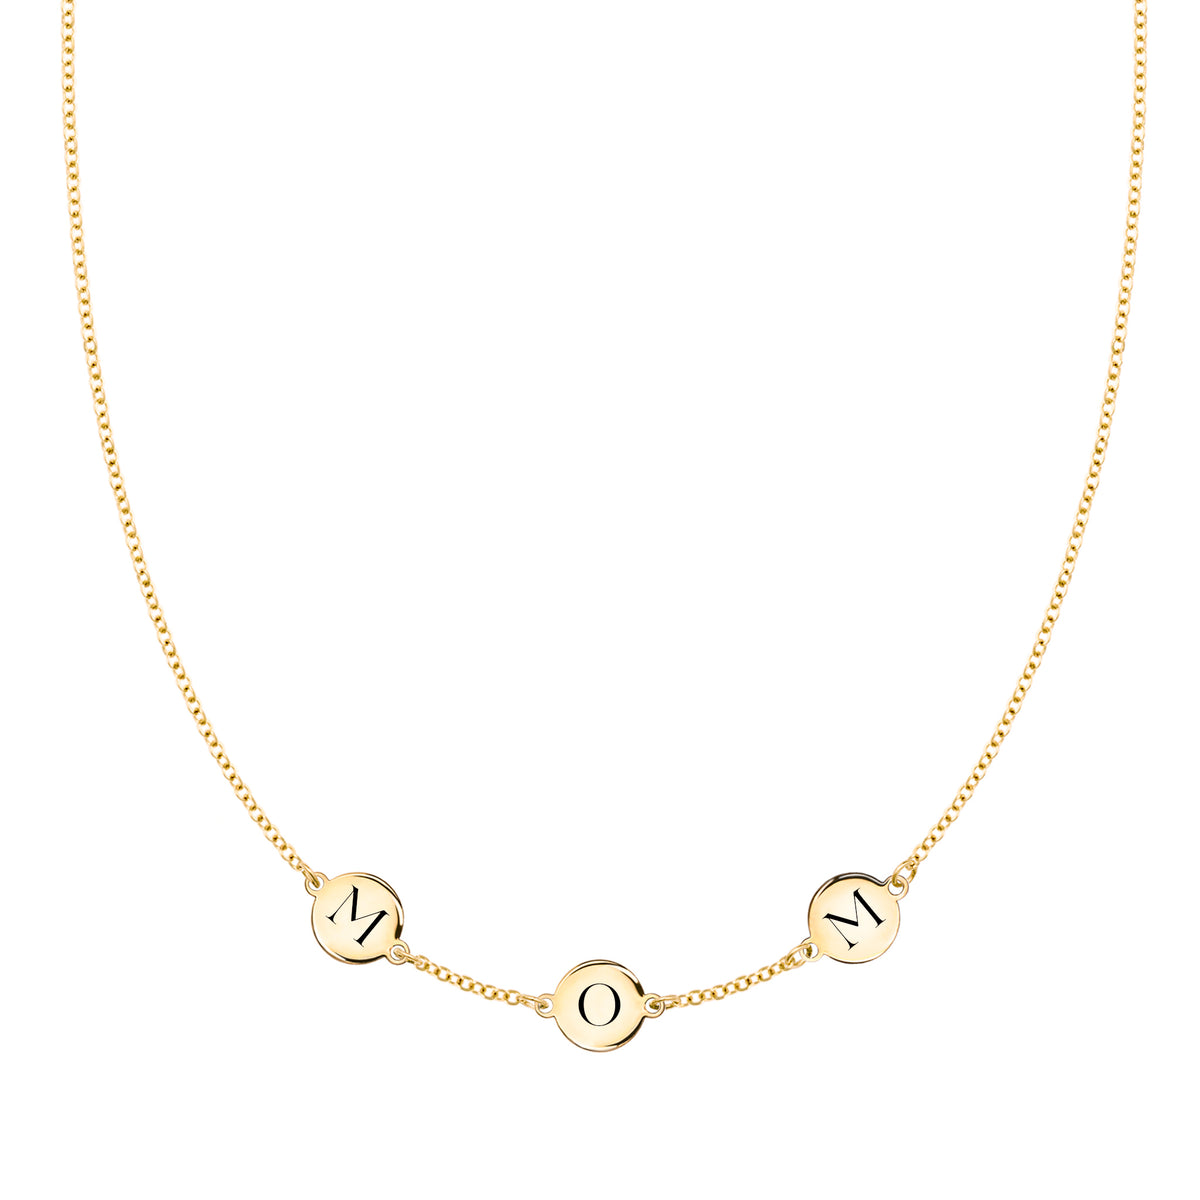 A 9ct 3 colour gold necklace and minor gold jewellery | 18th July 2018 |  Denhams